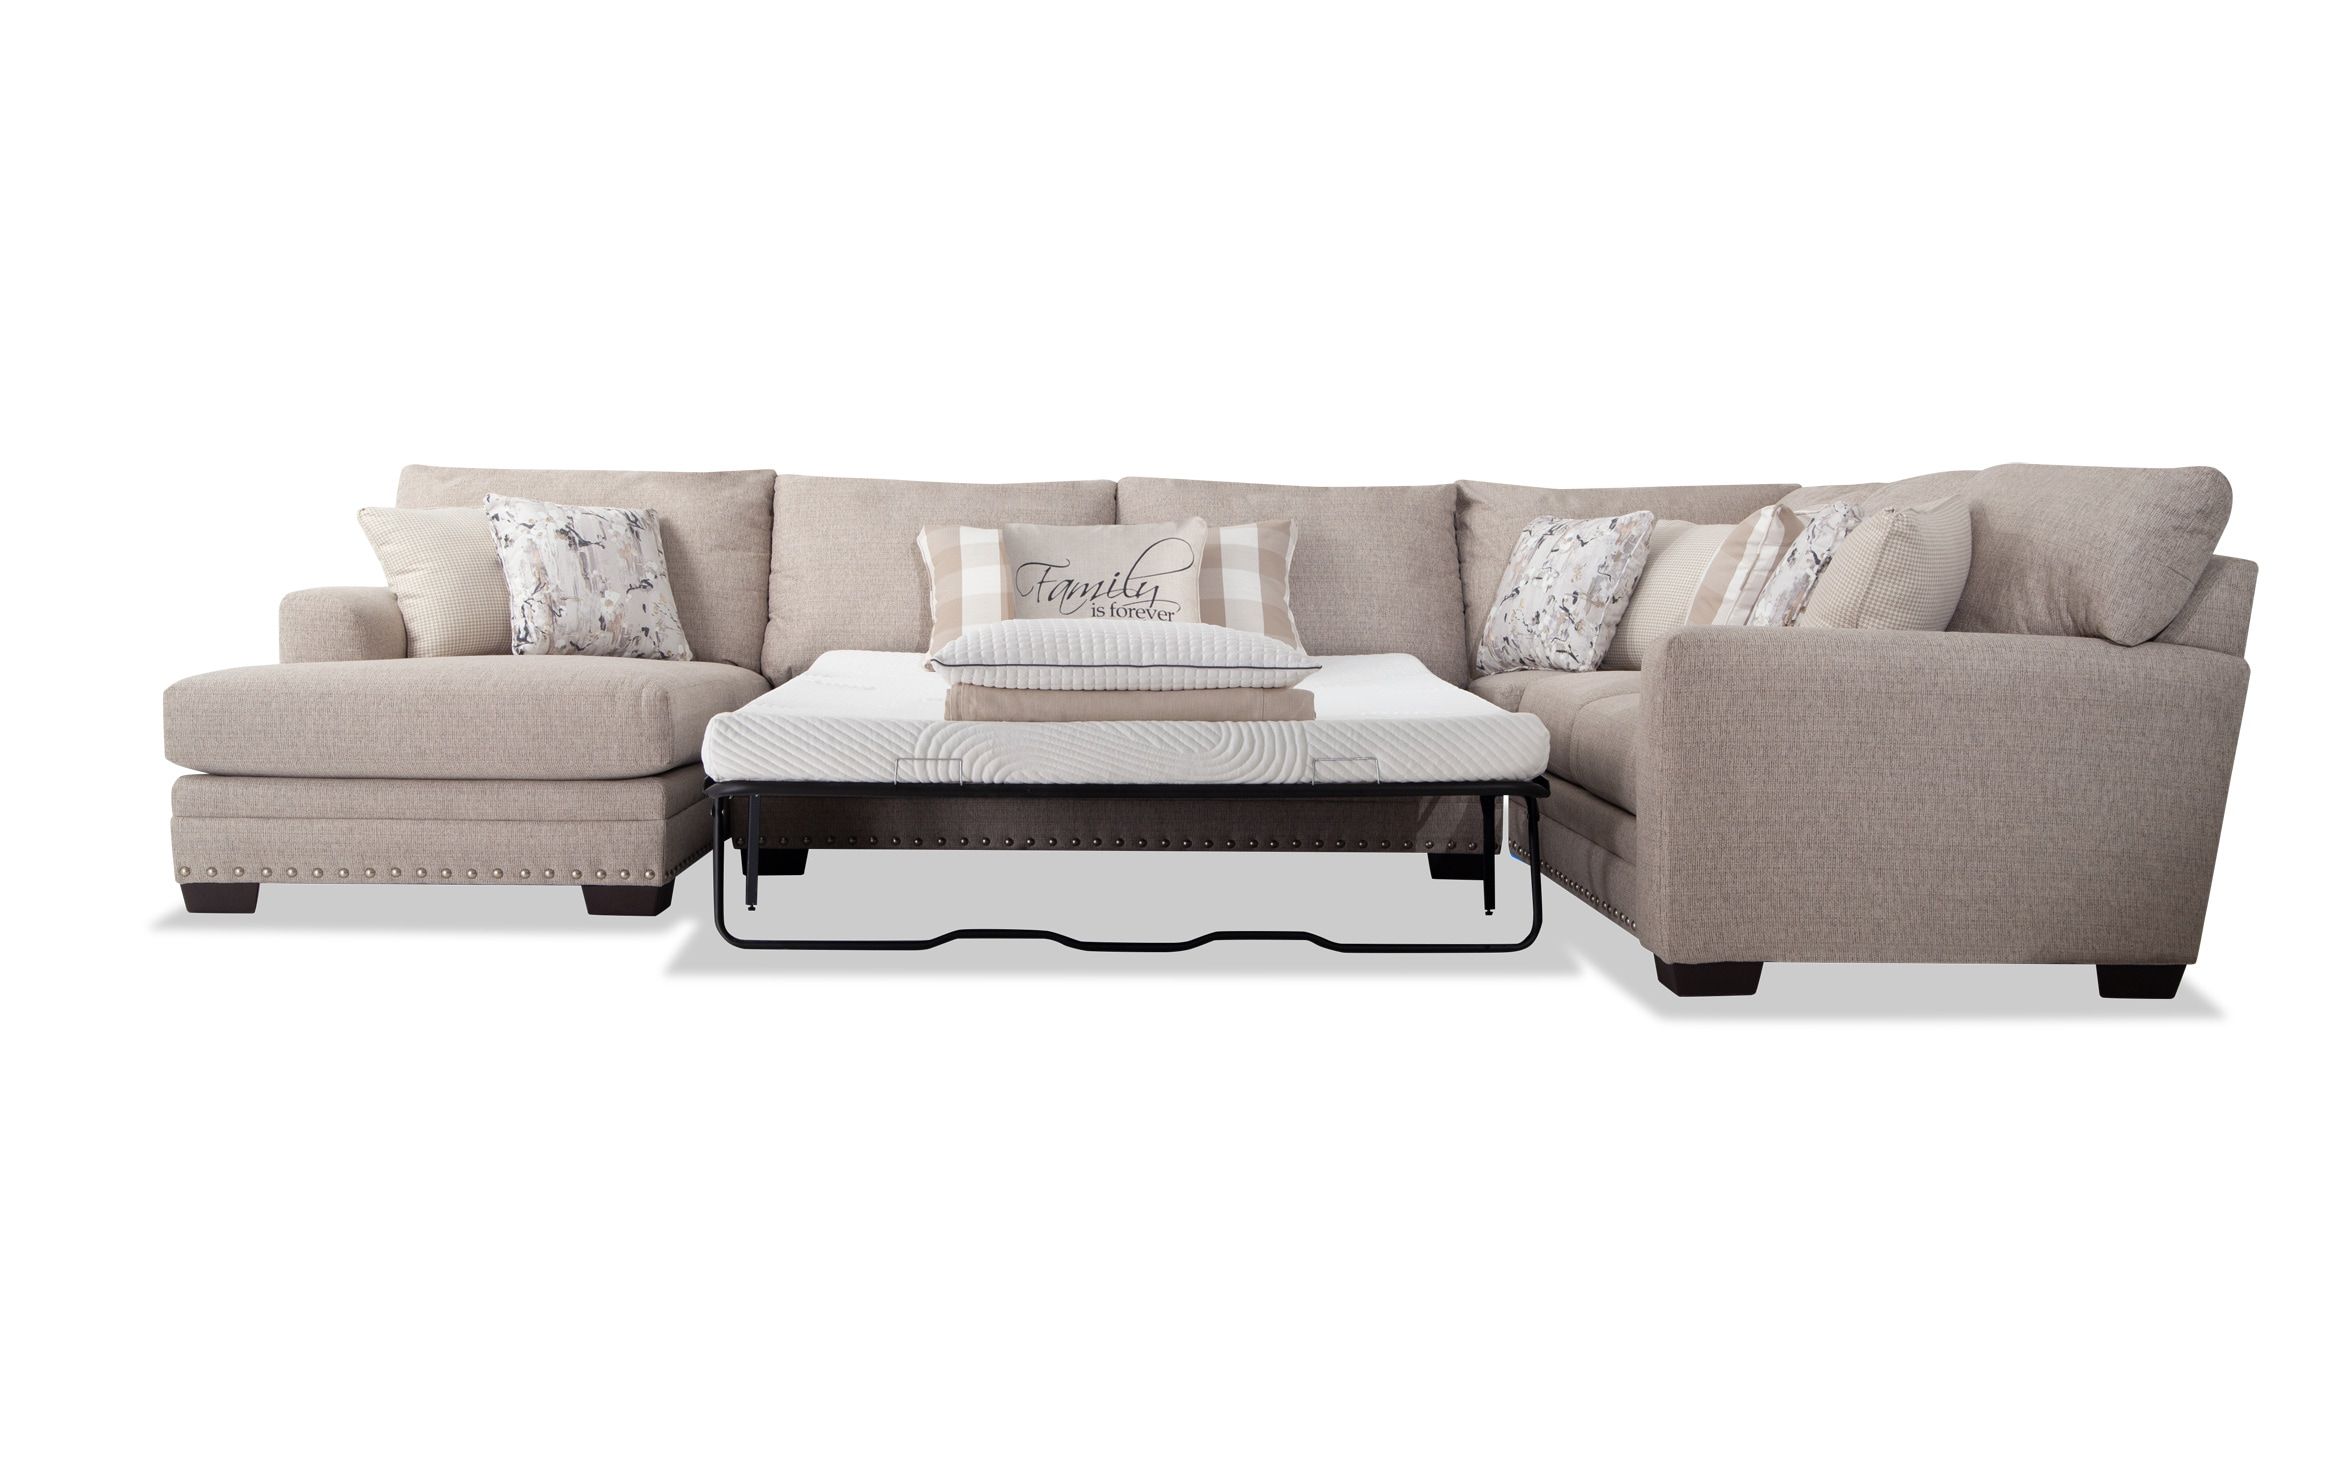 Cottage Chic Beige 4 Piece Right Arm Facing Bob O Pedic Queen Sleeper  Sectional | Bob'S Discount Furniture Throughout Left Or Right Facing Sleeper Sectional Sofas (Photo 14 of 15)